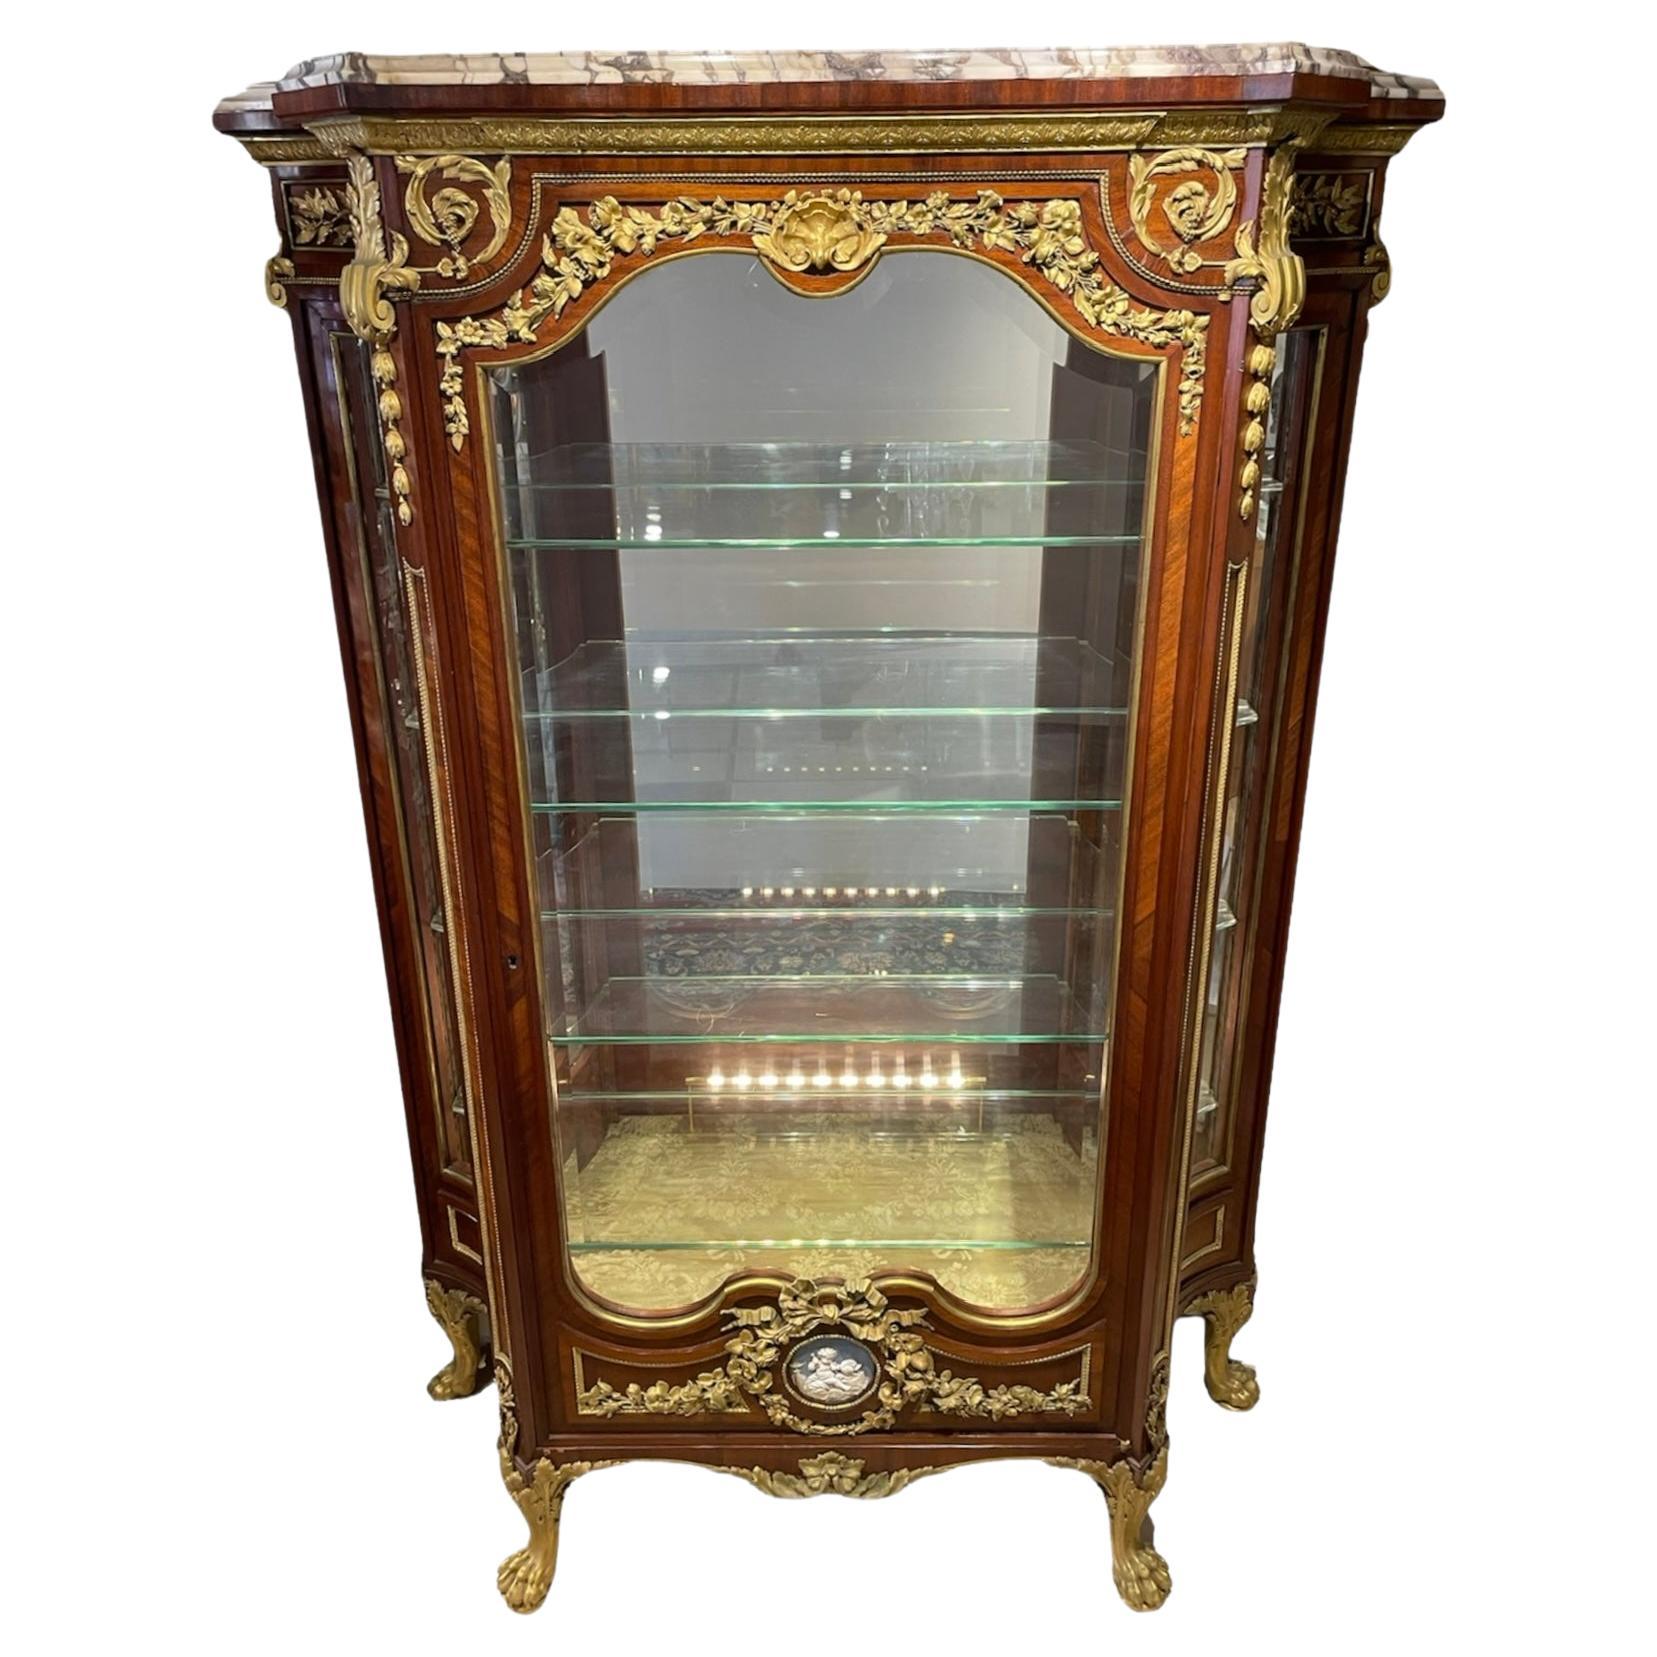 What category is a curio cabinet?